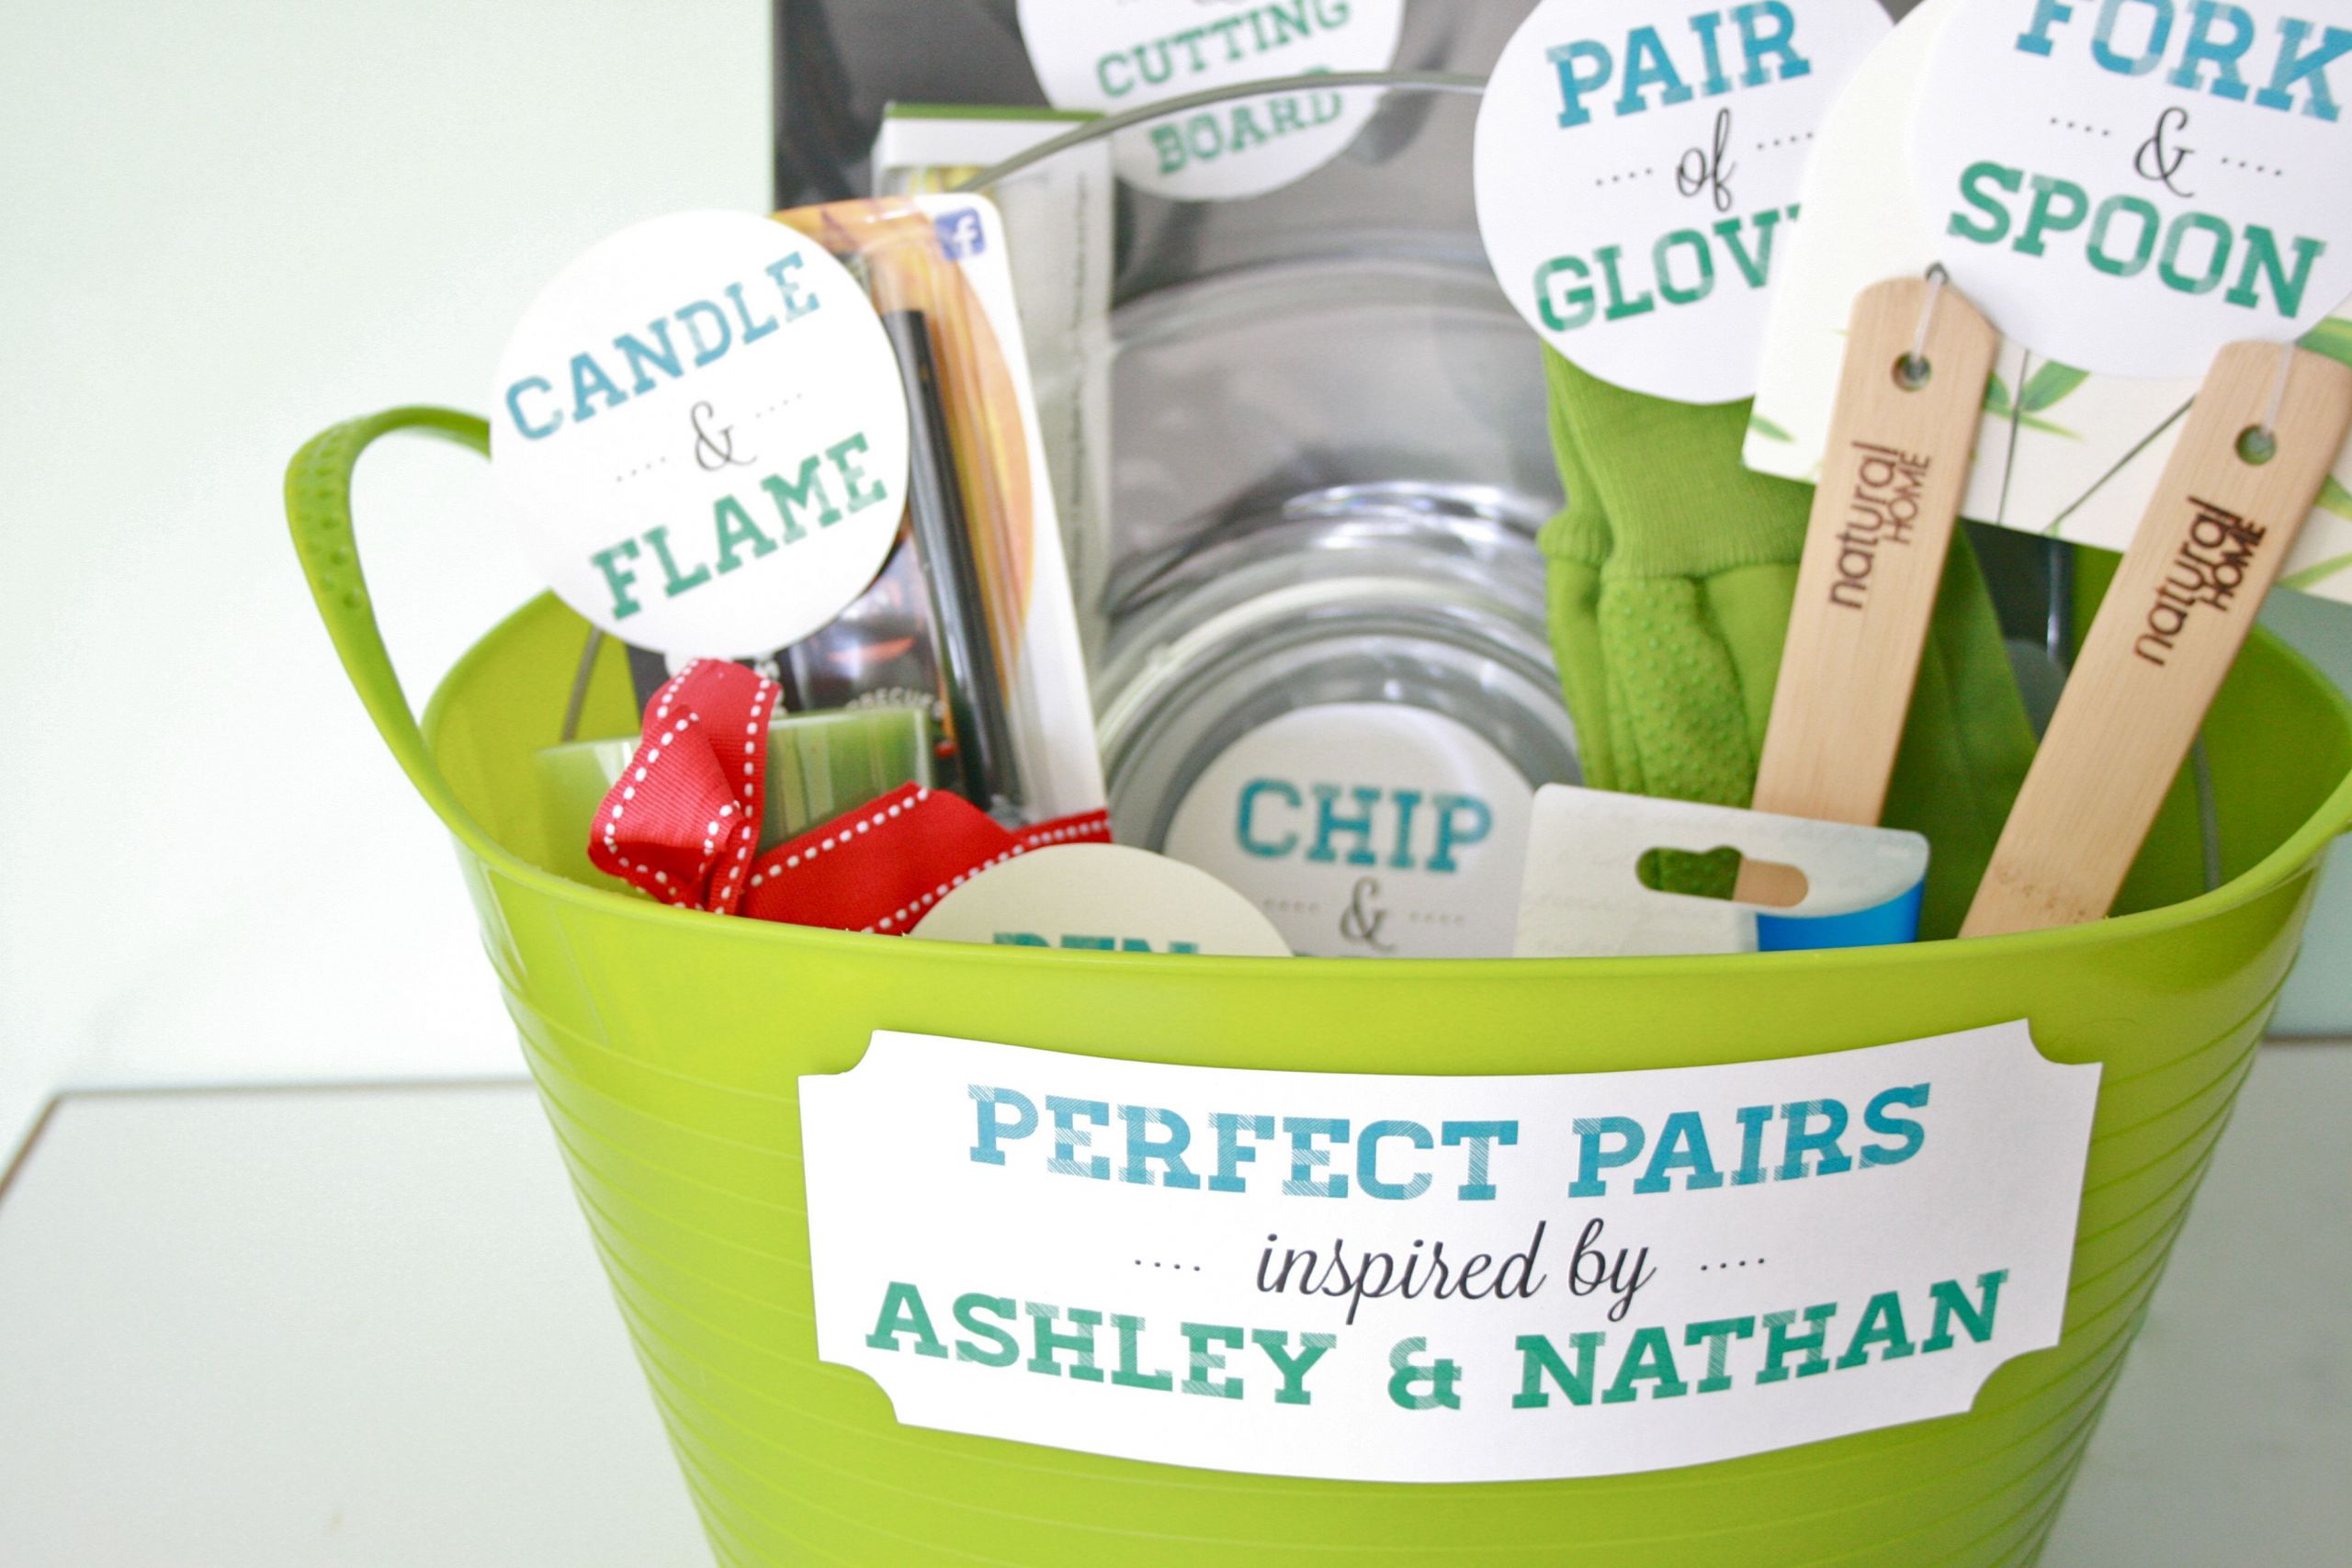 Diy Couple Gift Ideas
 DIY "Perfect Pairs" Bridal Shower Gift